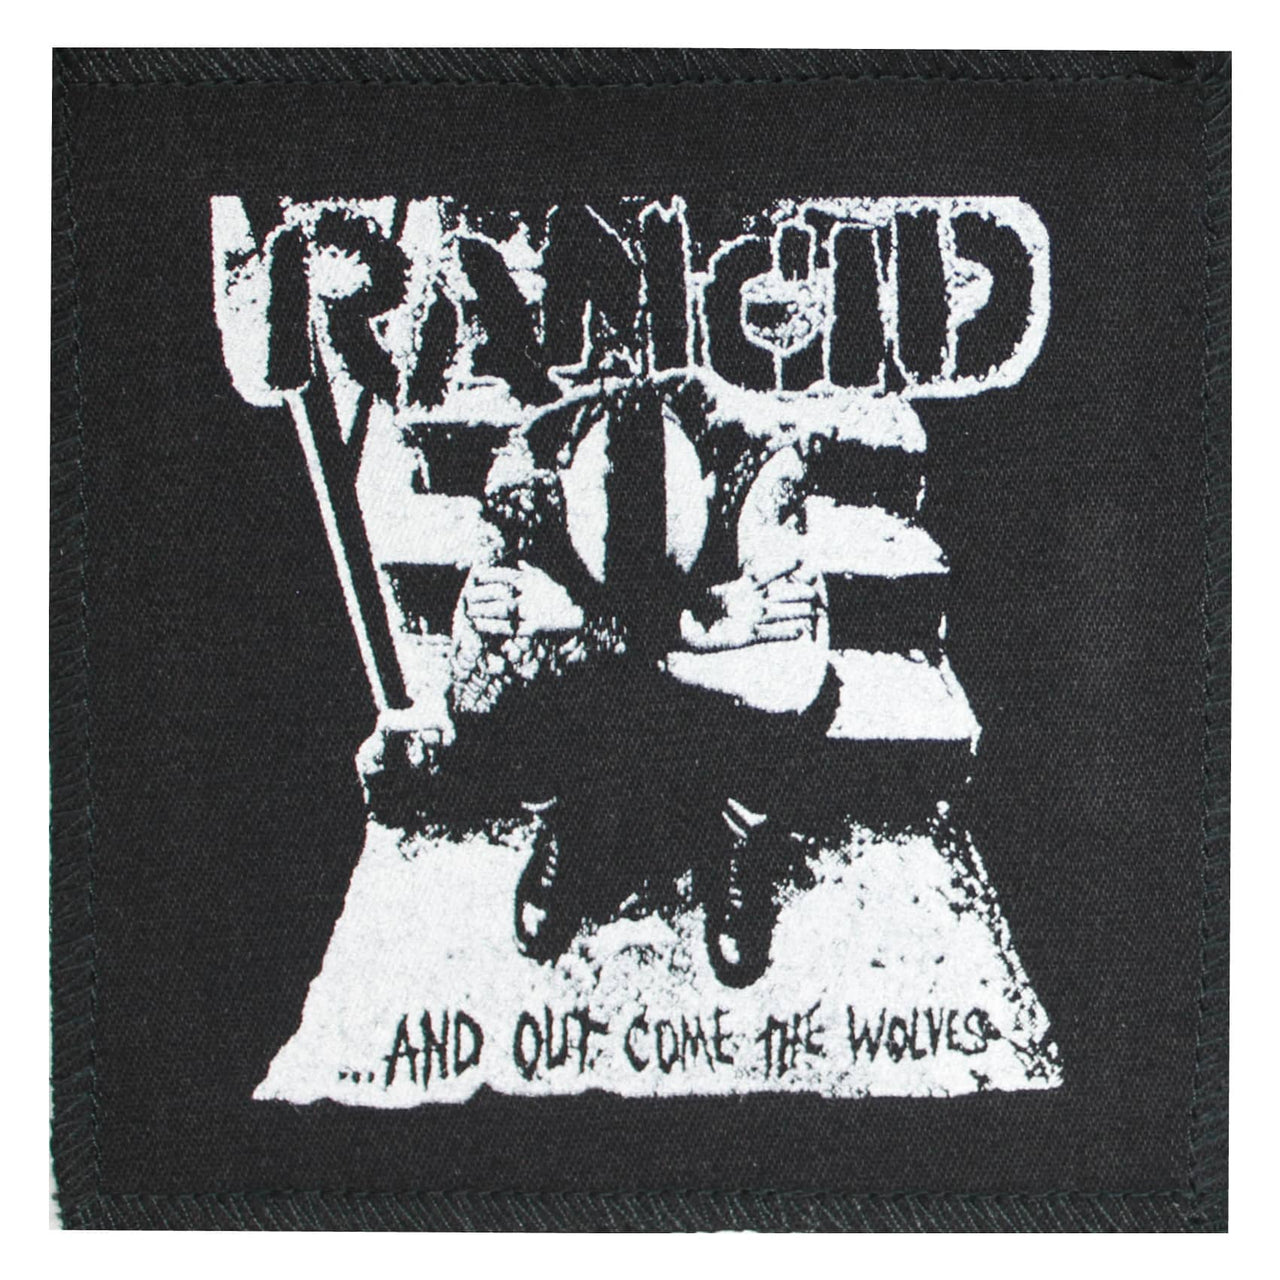 Rancid And Out Come the Wolves Cloth Patch